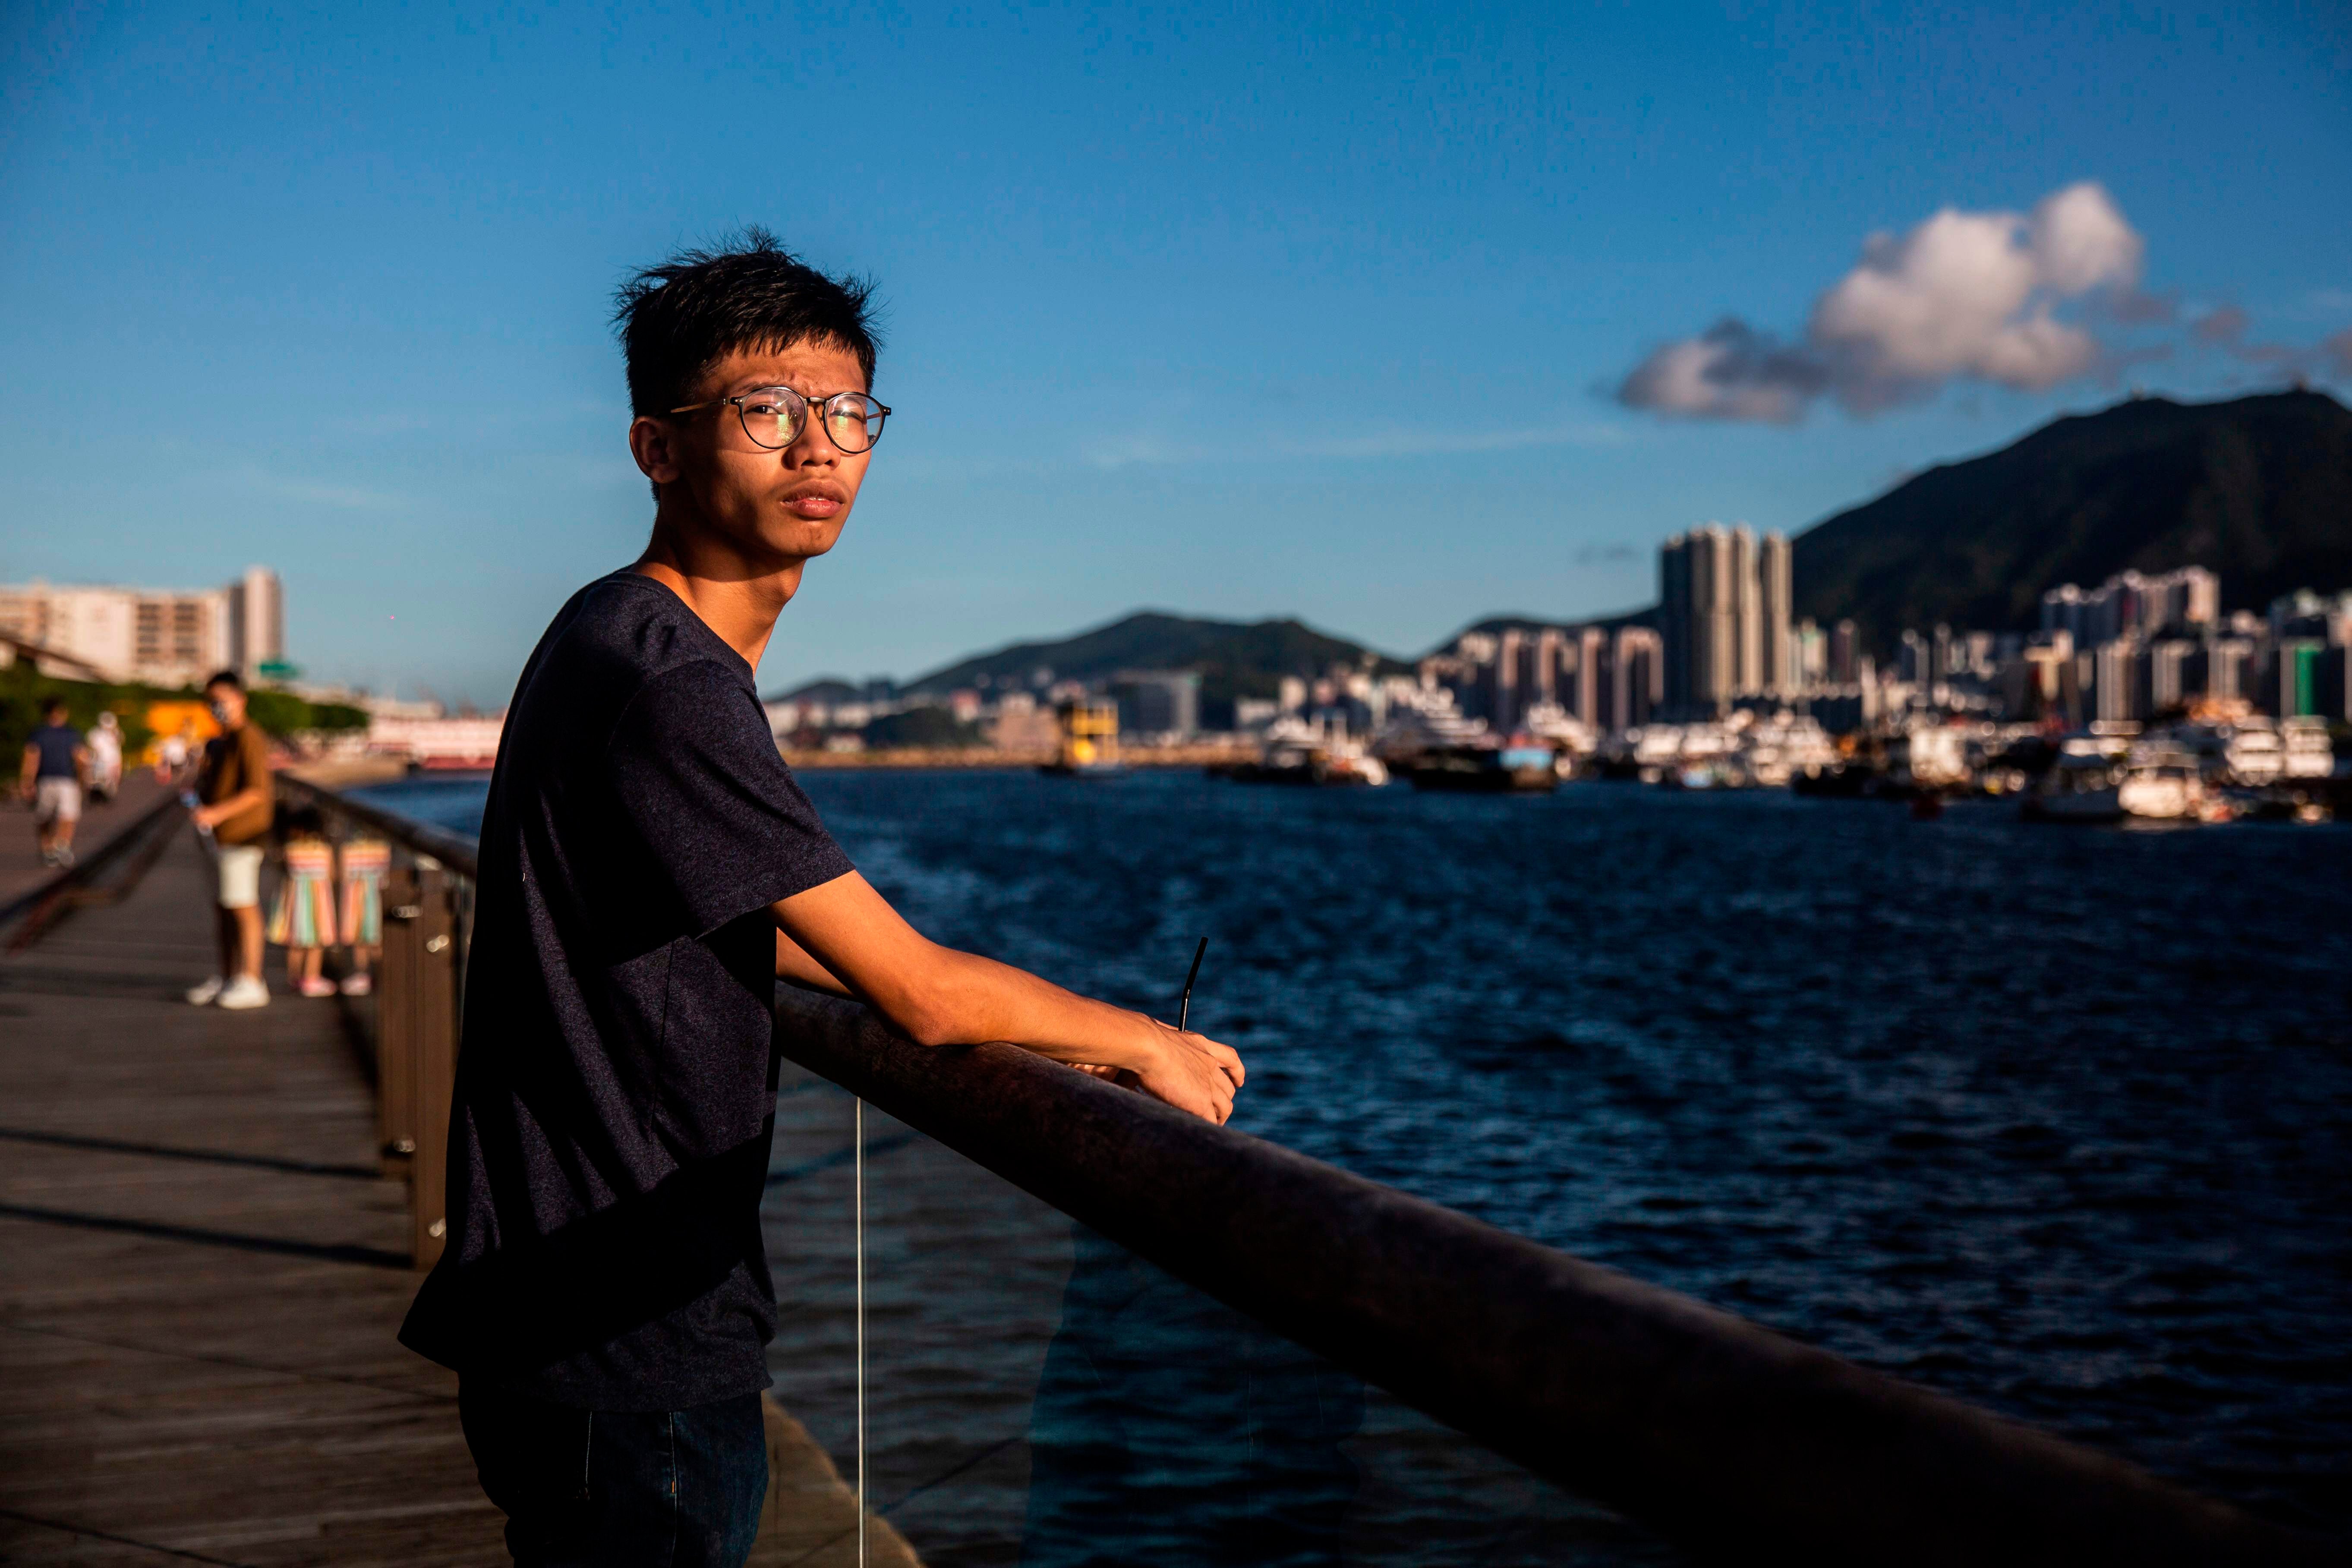 The 18-year-old pro-democracy activist Tony Chung was arrested in October